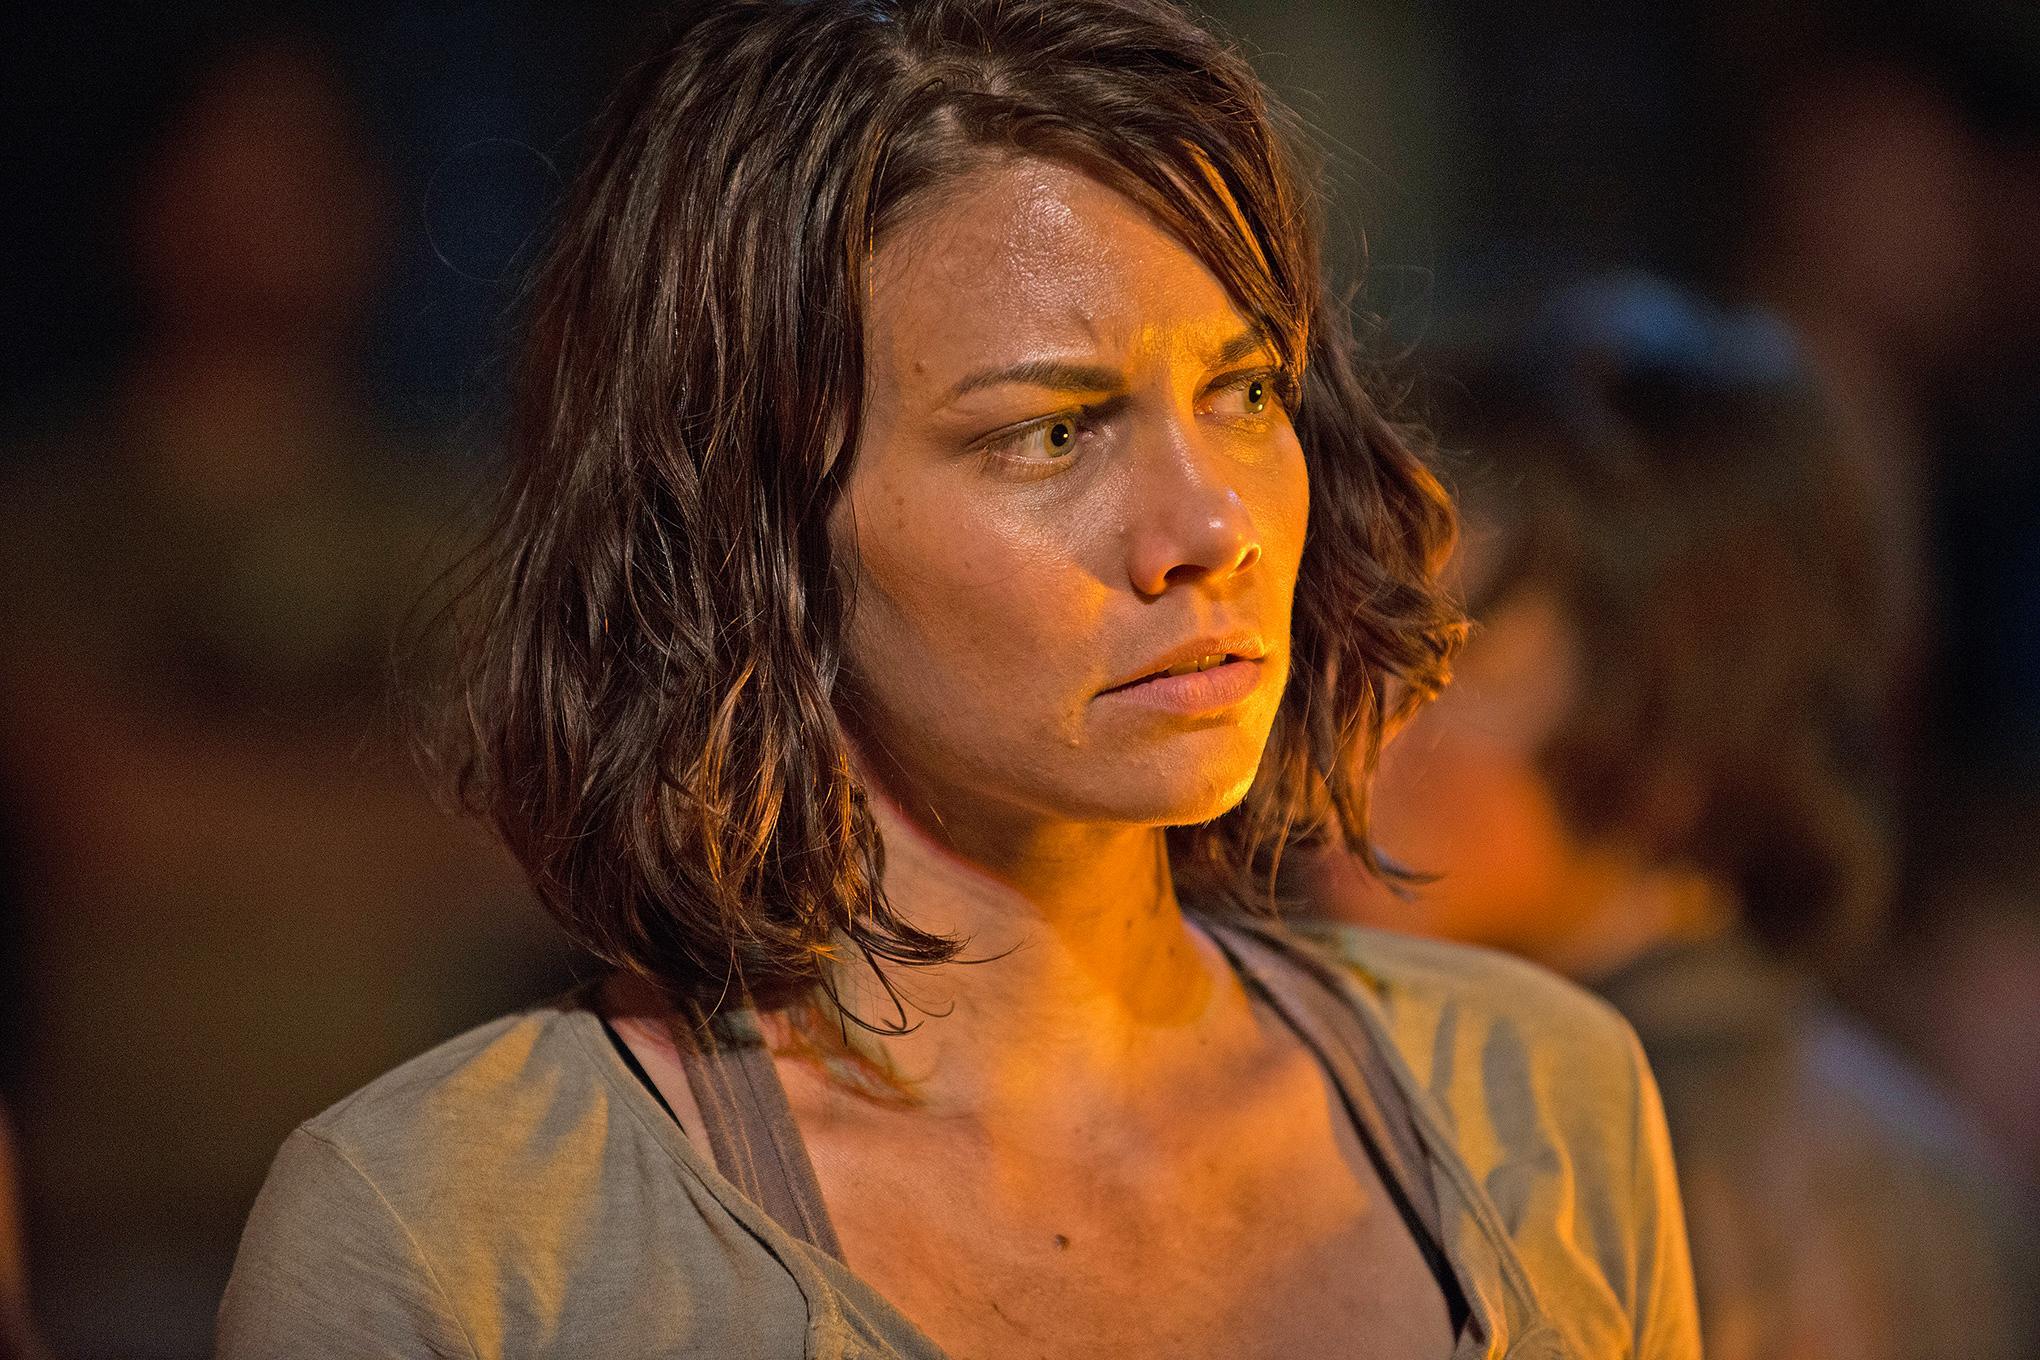 The Walking Deads Lauren Cohan Id Rather Have The Validation Of 4941